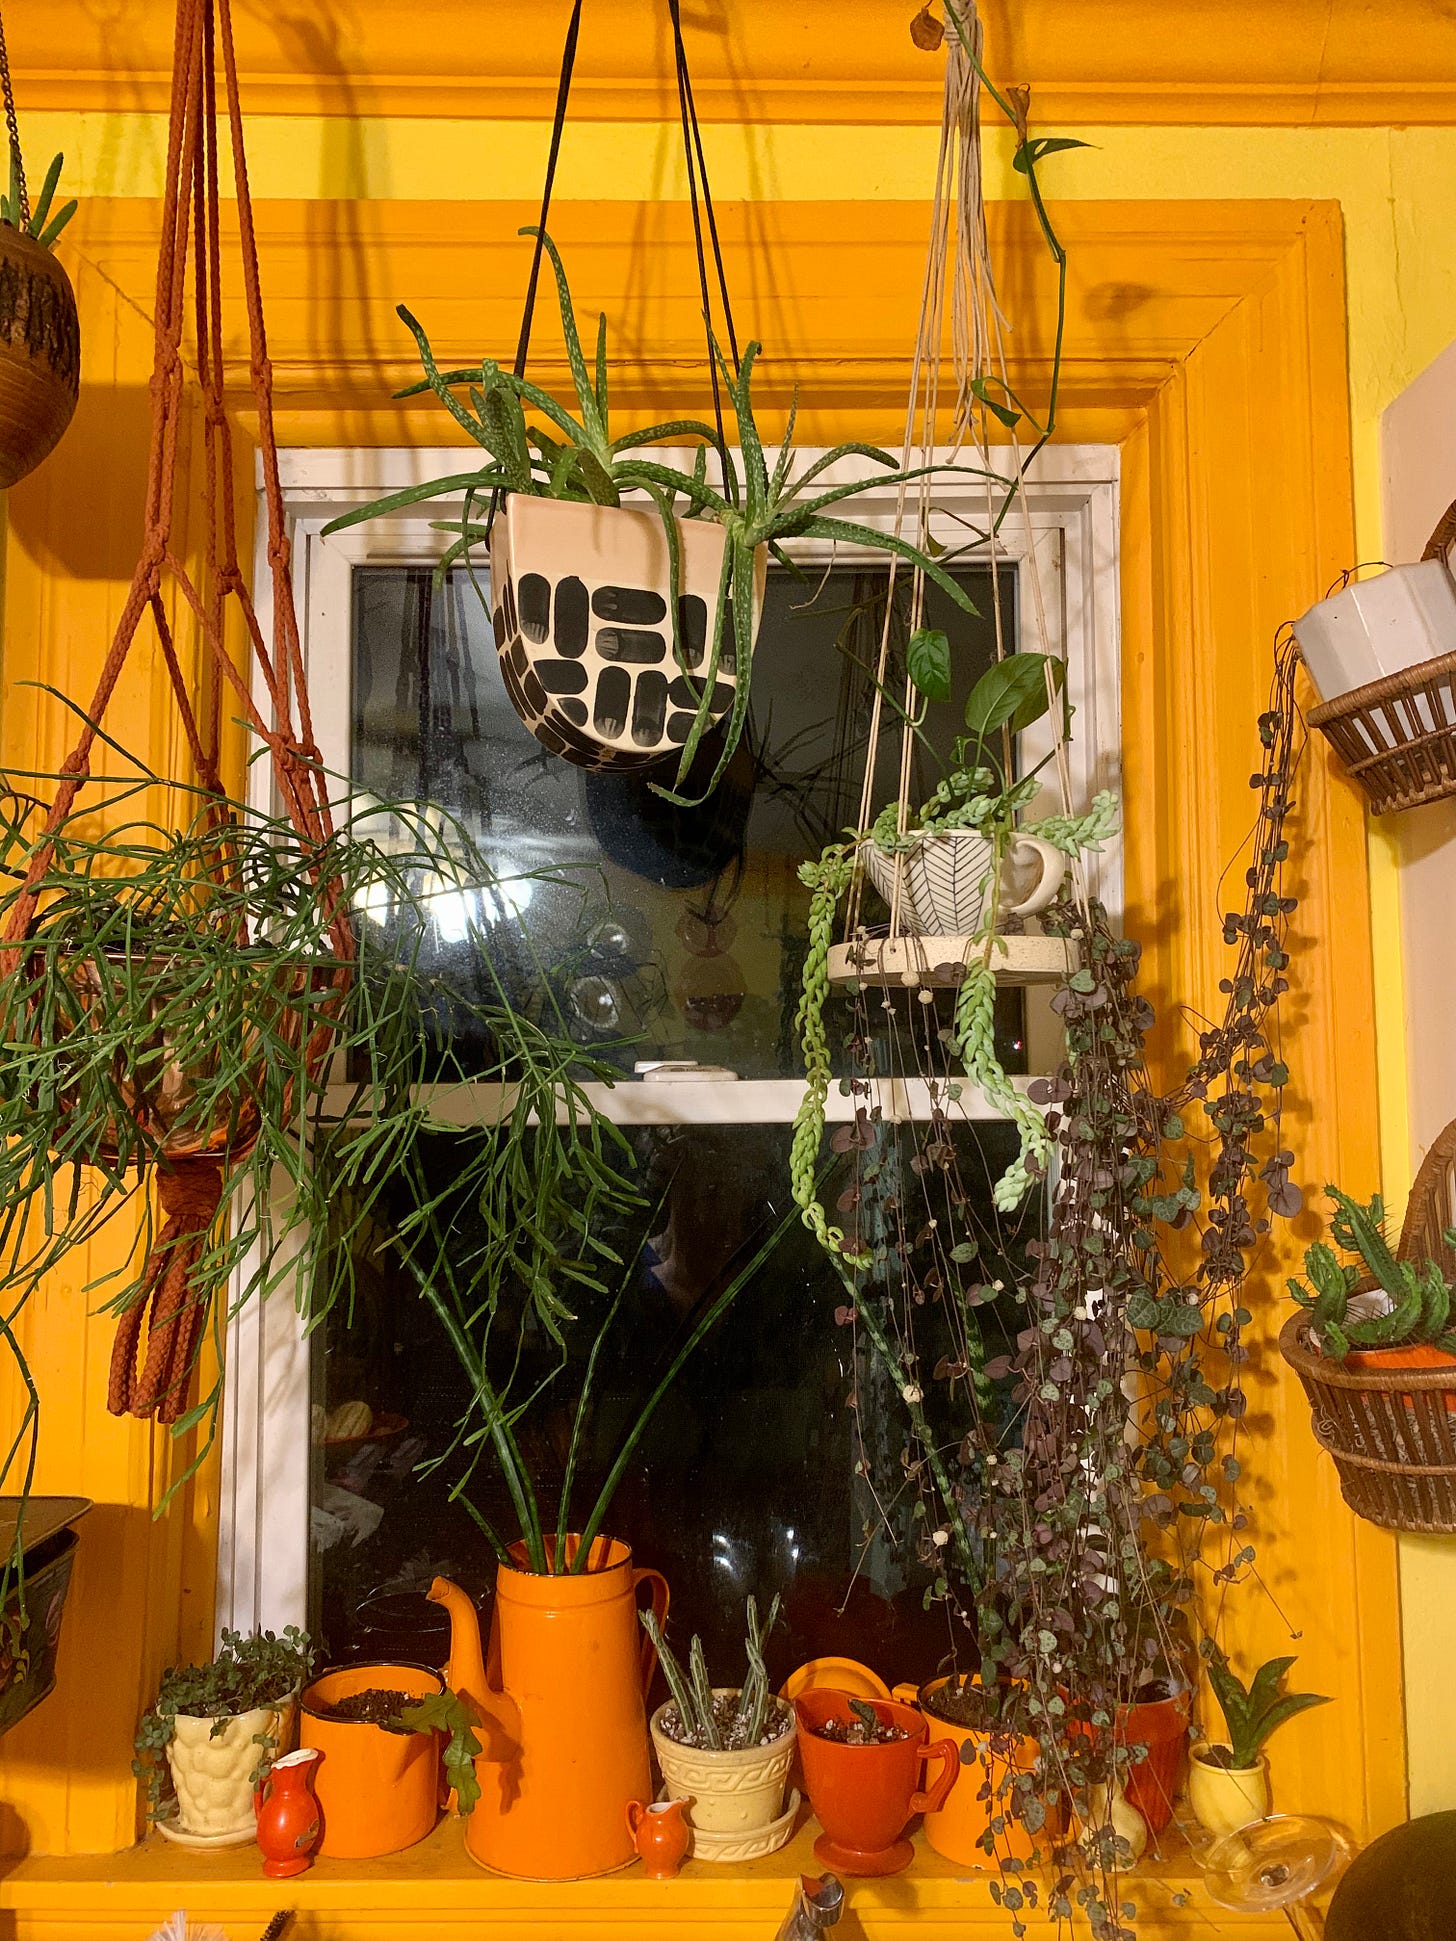 plants hanging in front of a window in an orange room